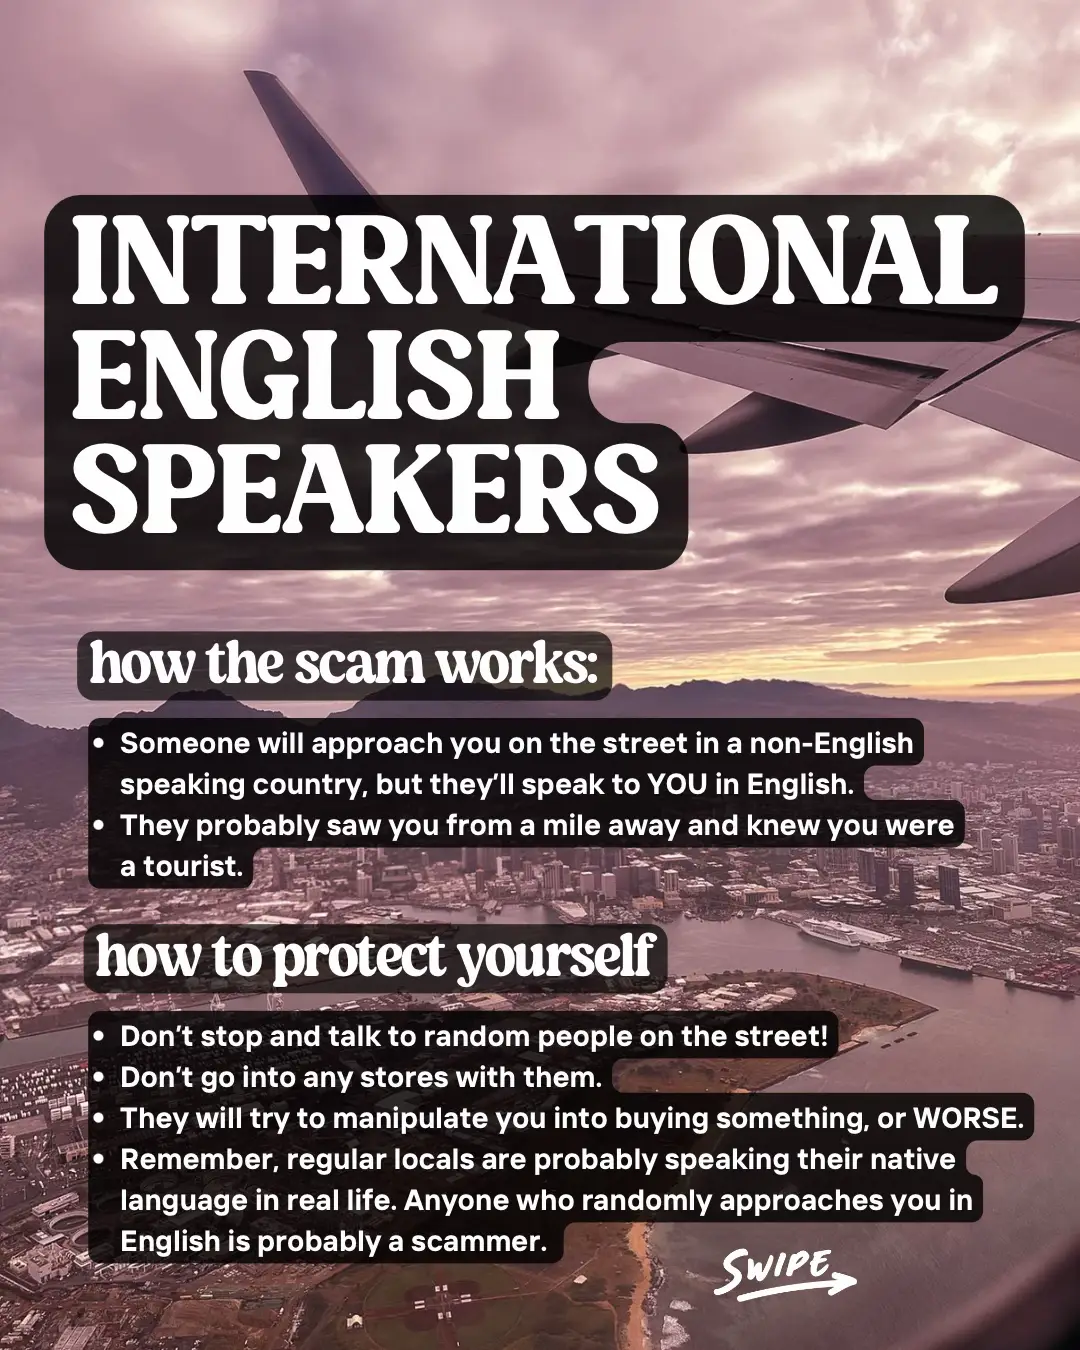  A scammer will approach you on the street in a non-English speaking country, but they'll speak to YOU in English. They probably saw you from a mile away and knew you were a tourist. How to protect yourself is